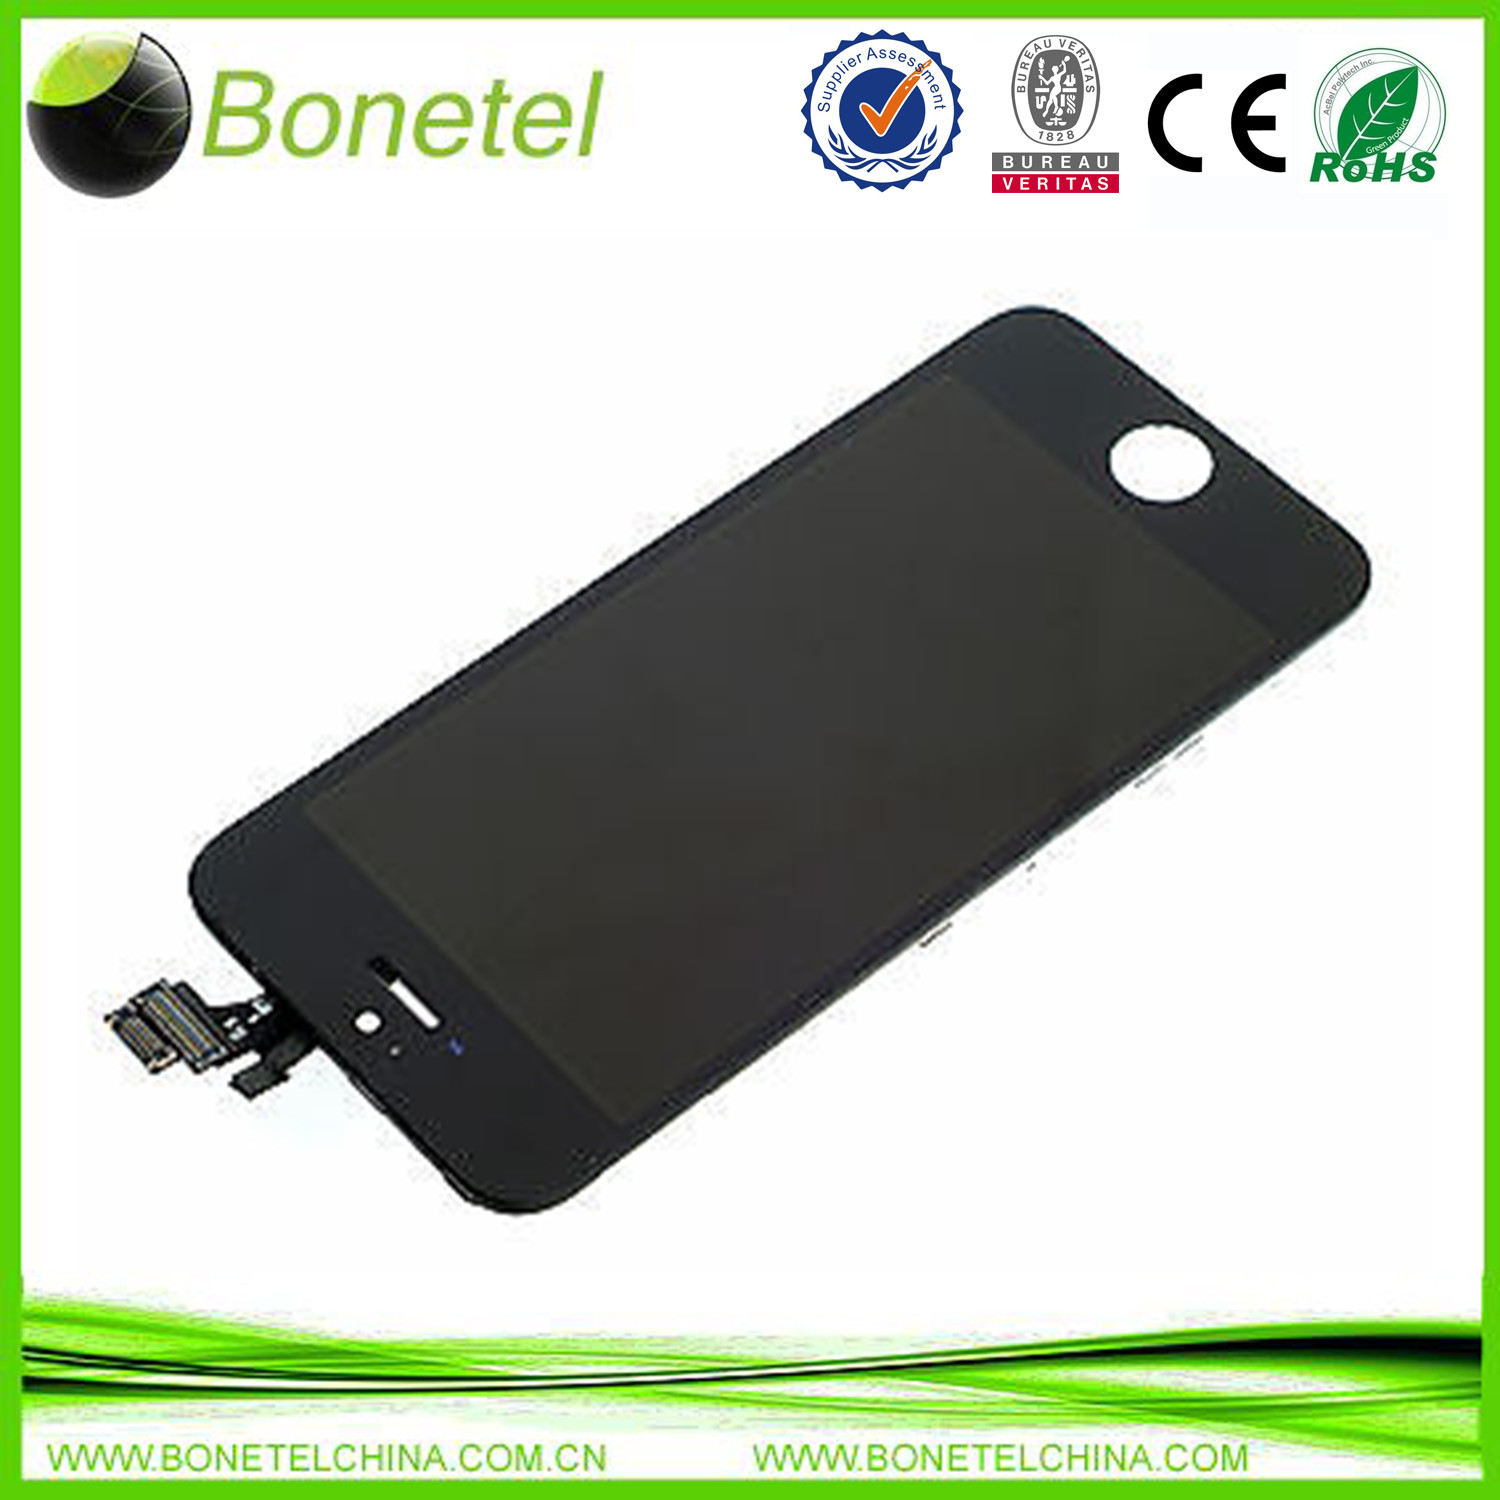 LCD Touchscreen Display Assembly Digitizer for iPhone 5C Black